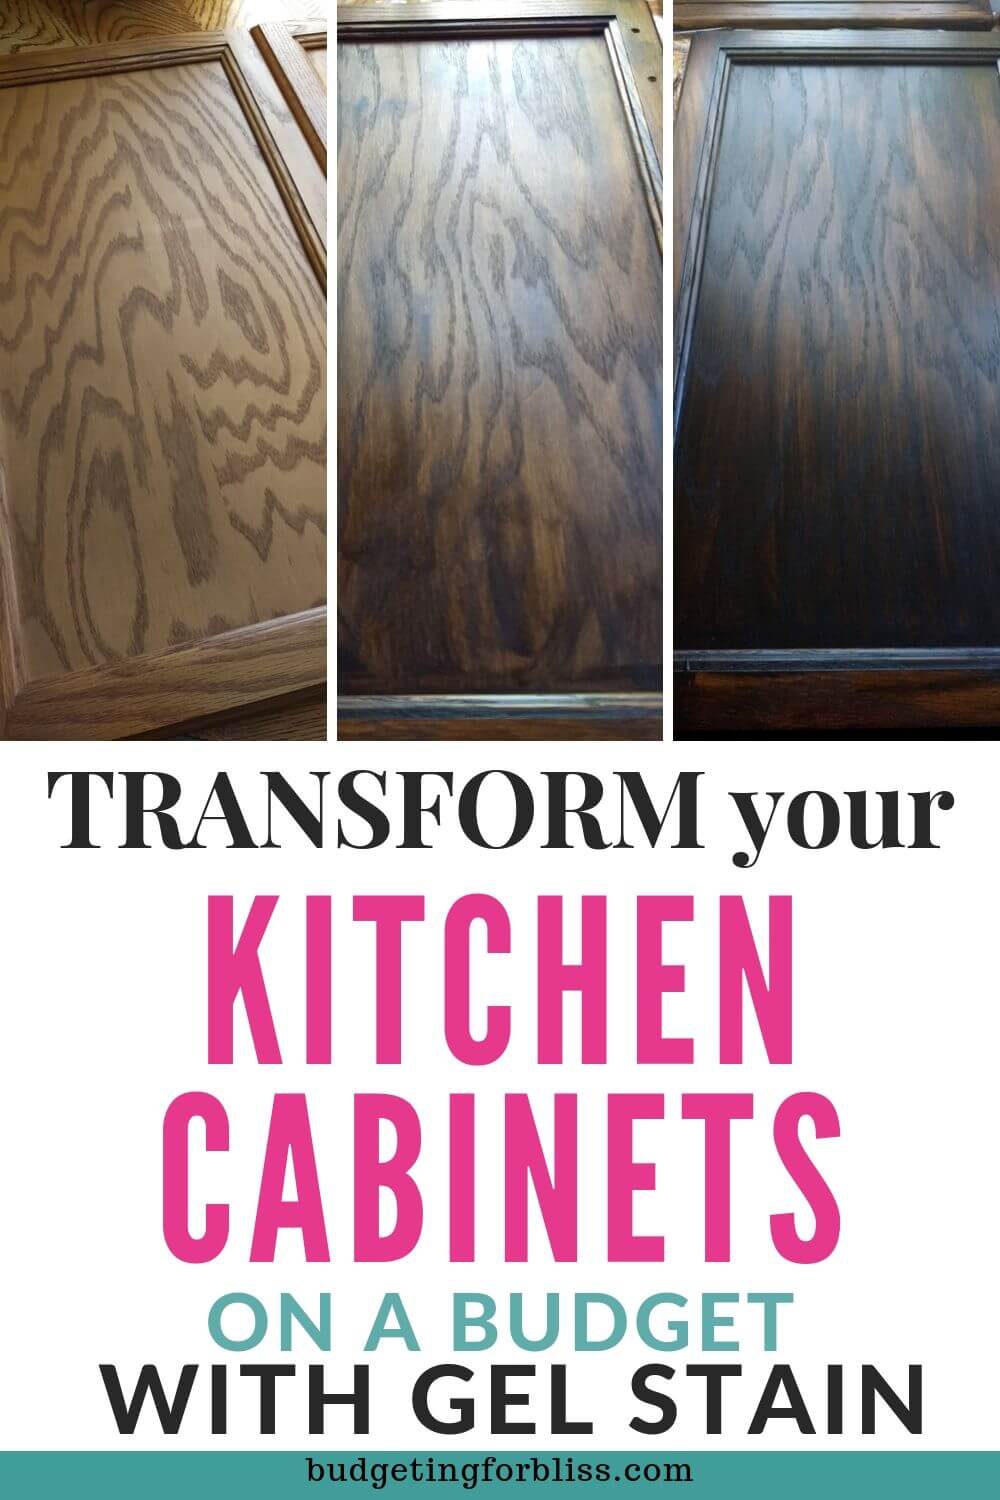 Gel Stain Your Cabinets On A Budget, Gel Staining Oak Cabinets Darker